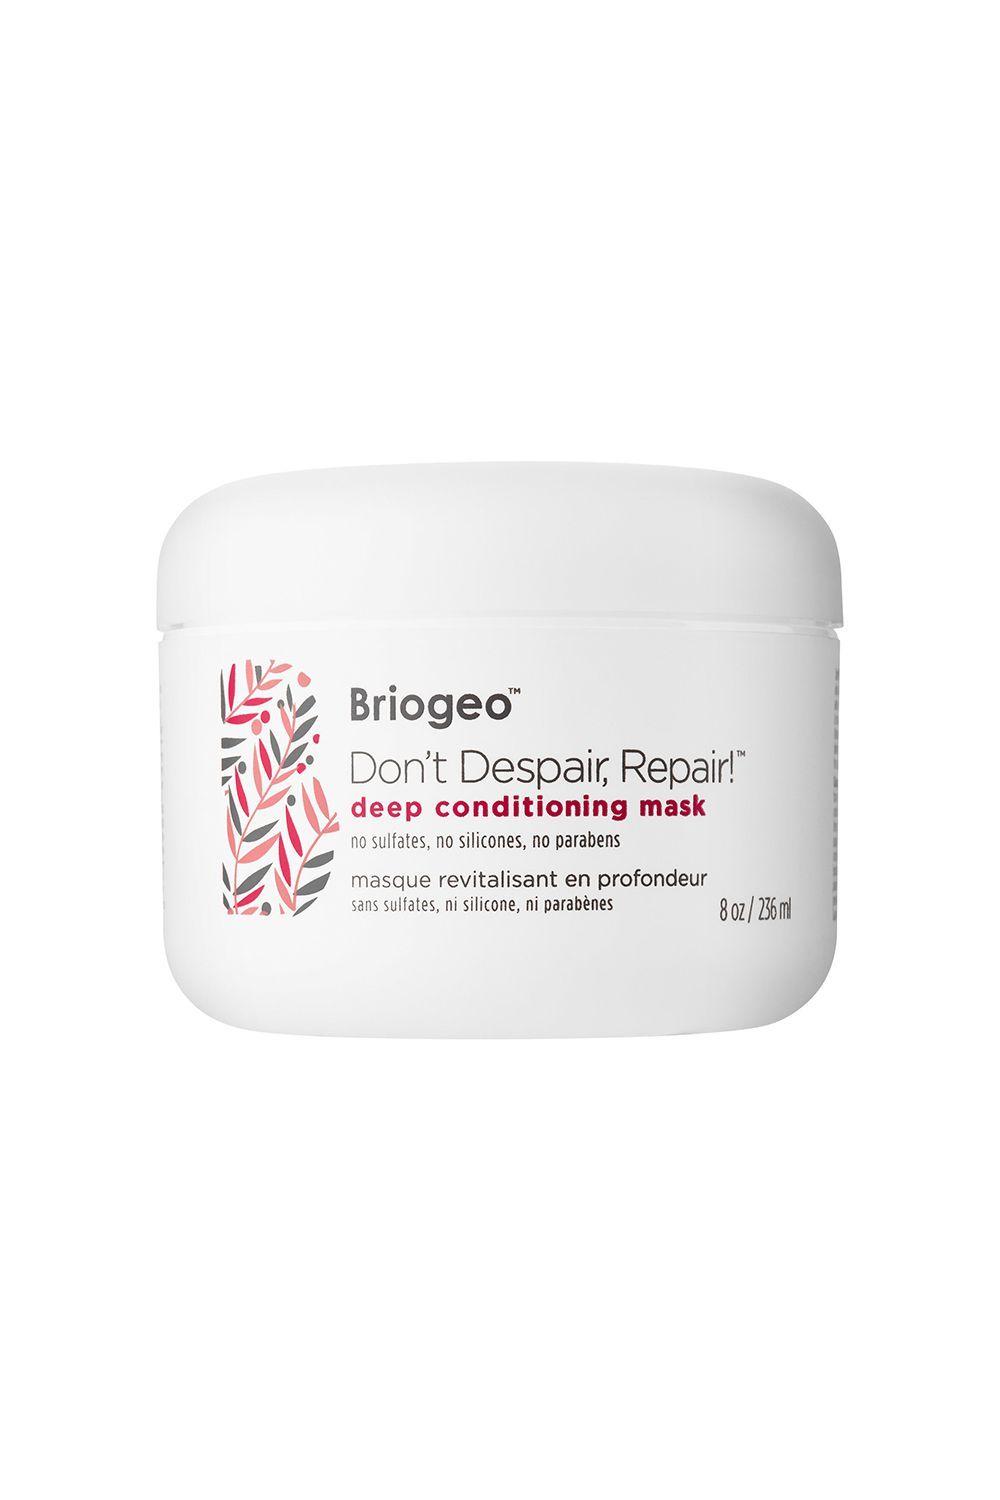 The Best Hair Mask For Bleached Dry Colored Or Brassy Hair